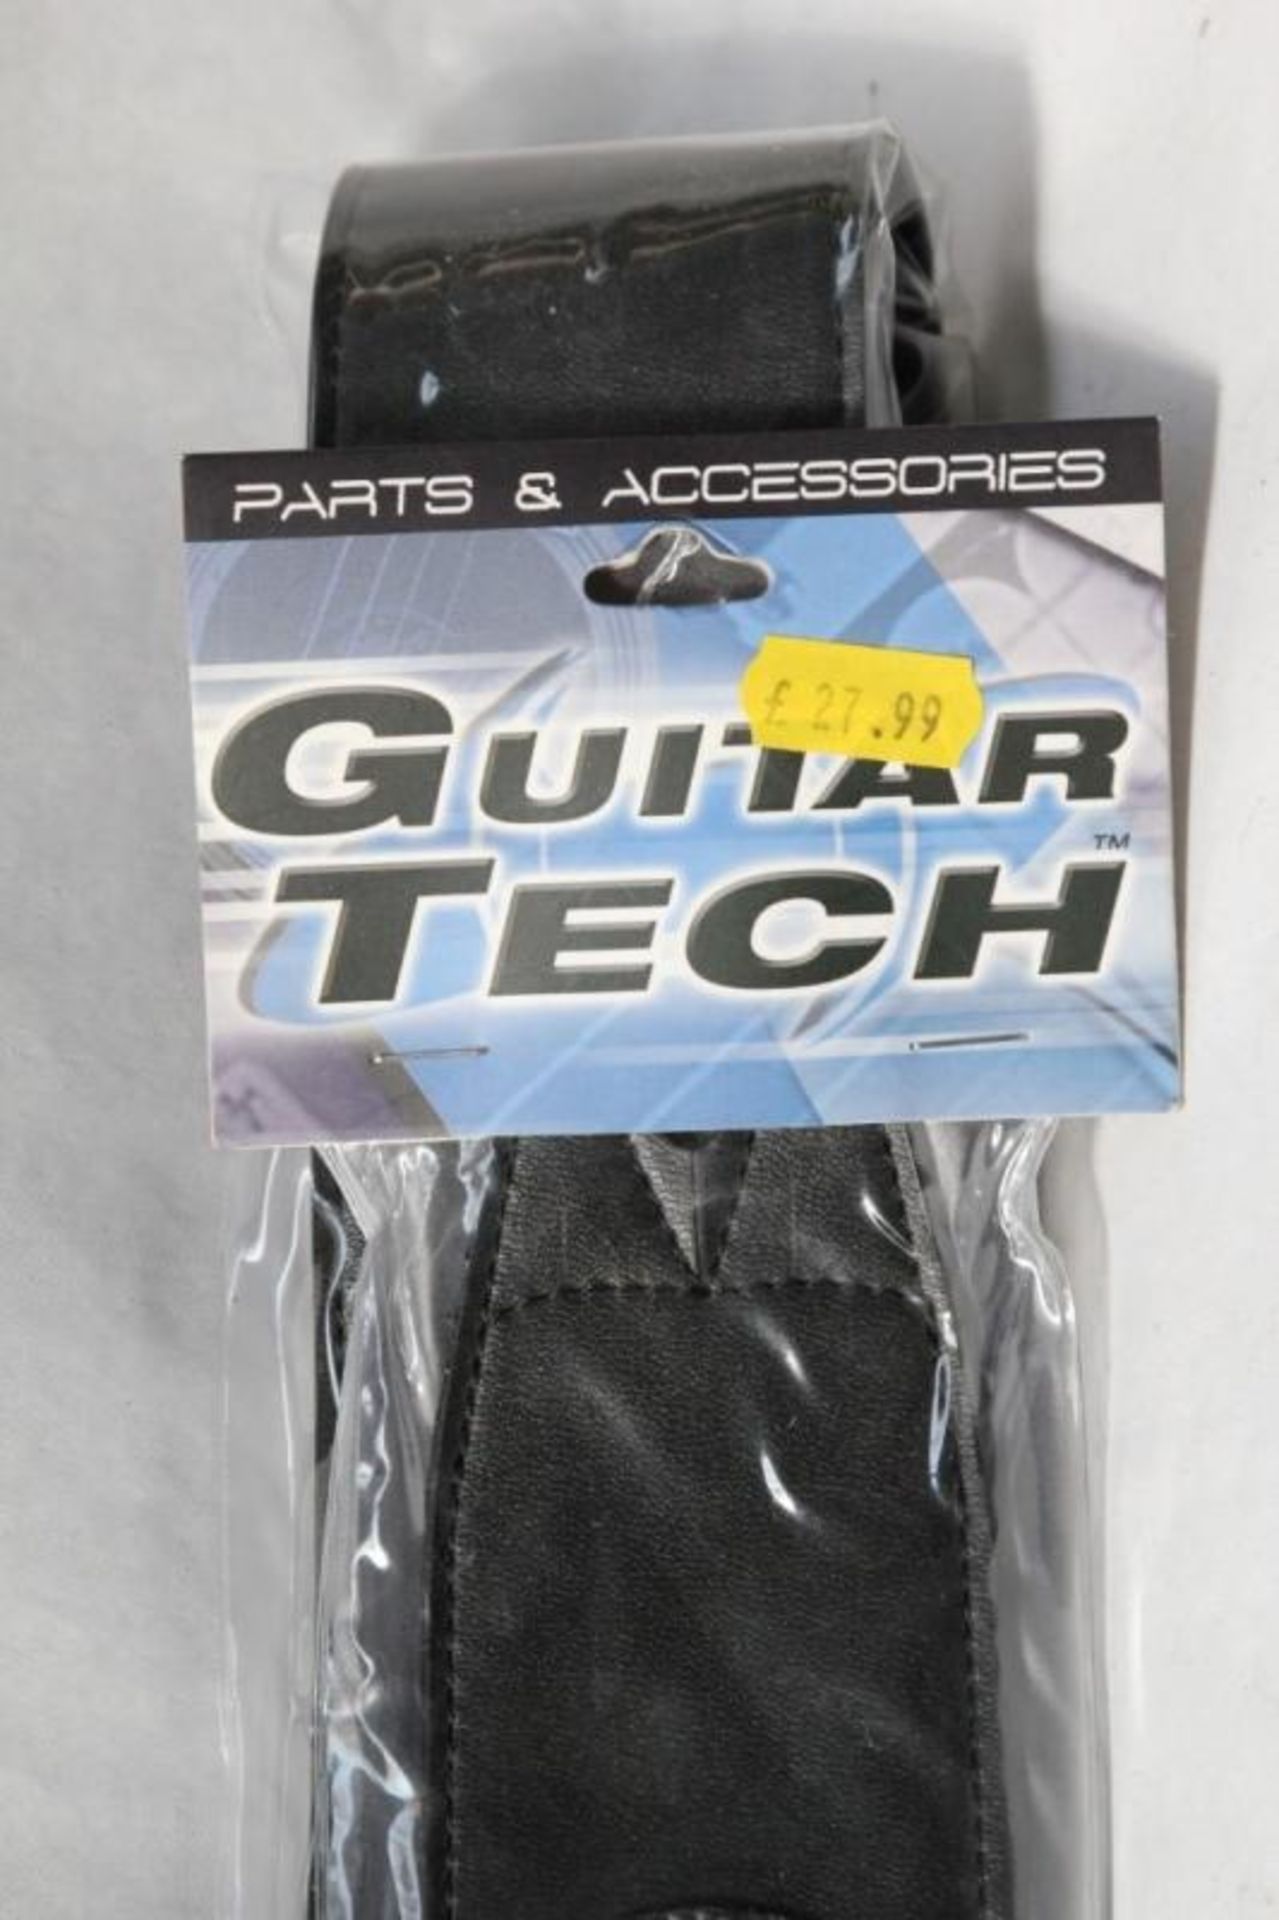 1 x Guitar Tech Leather Studded Guitar Strap - New in Packet - CL020 - Ref Pro173 - Location: - Image 2 of 3